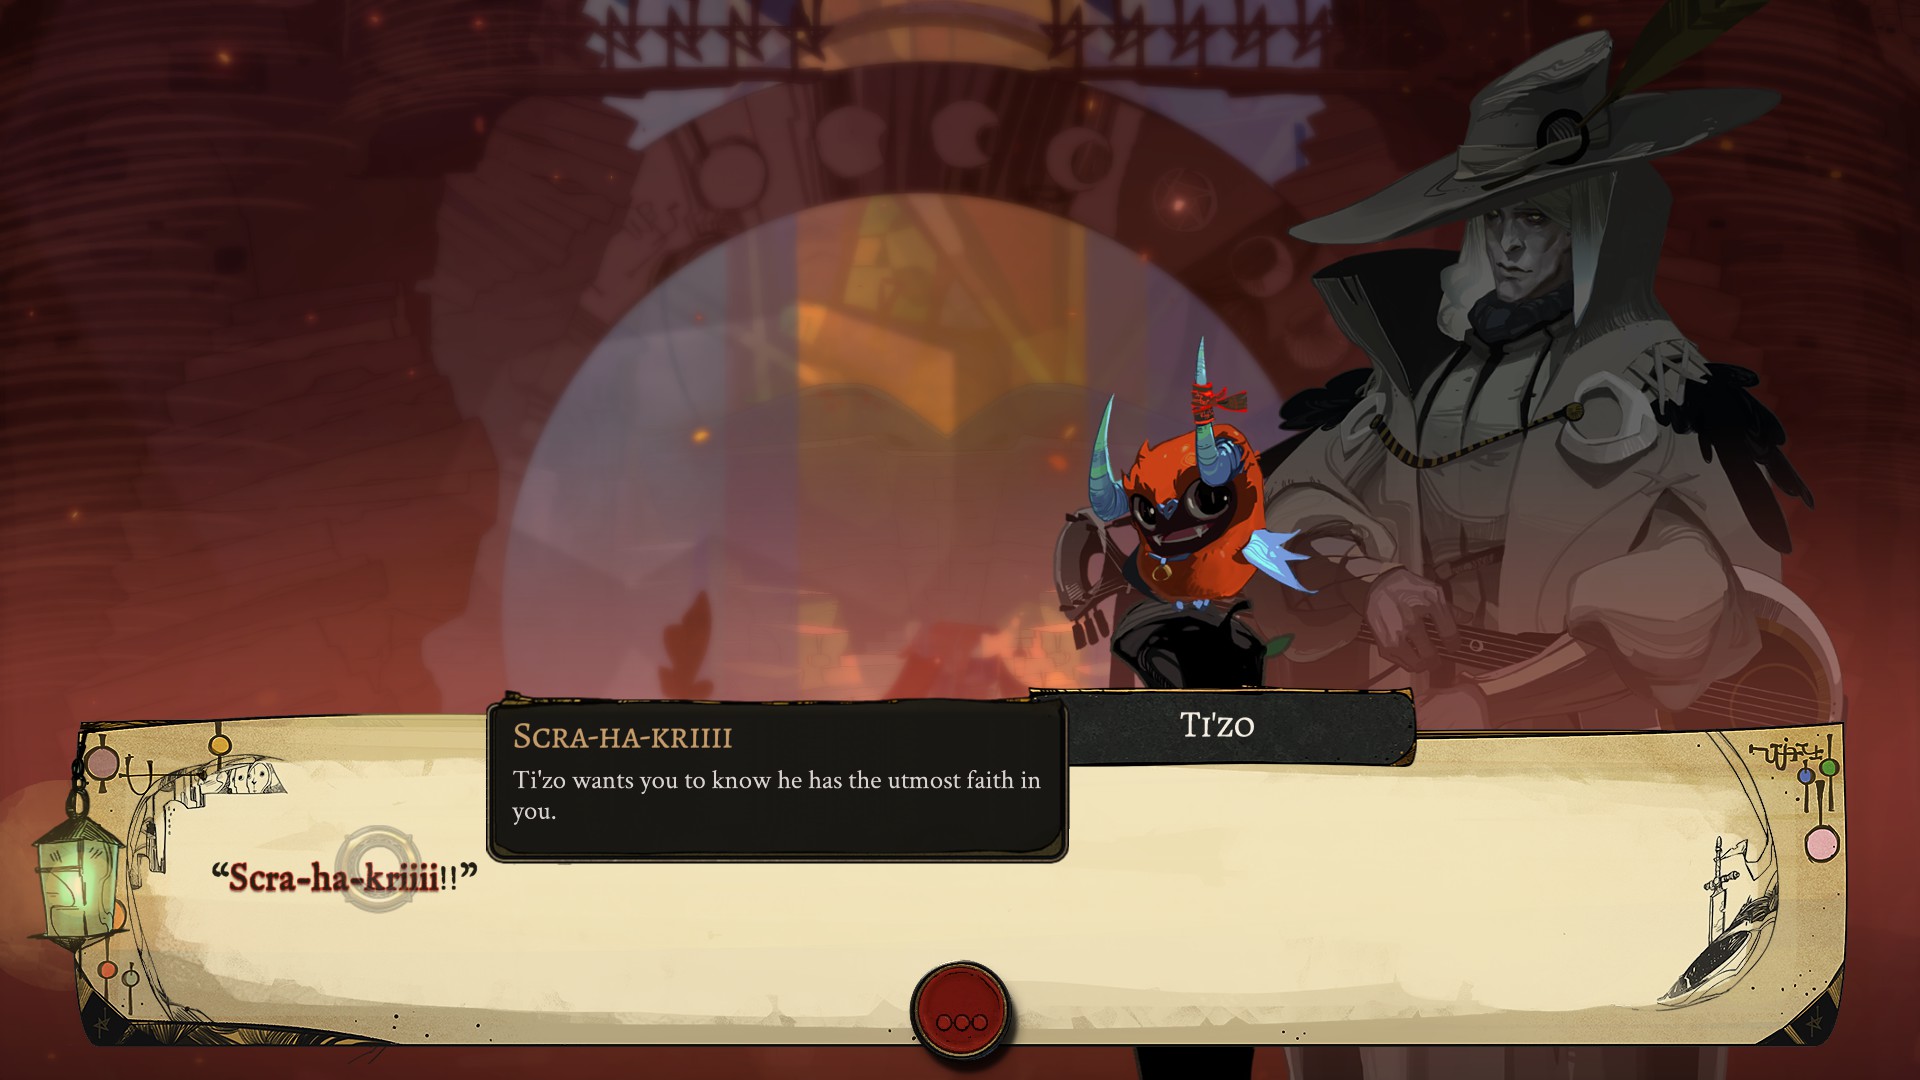 Pyre Developer Explains Why There’s No ‘Best’ Ending